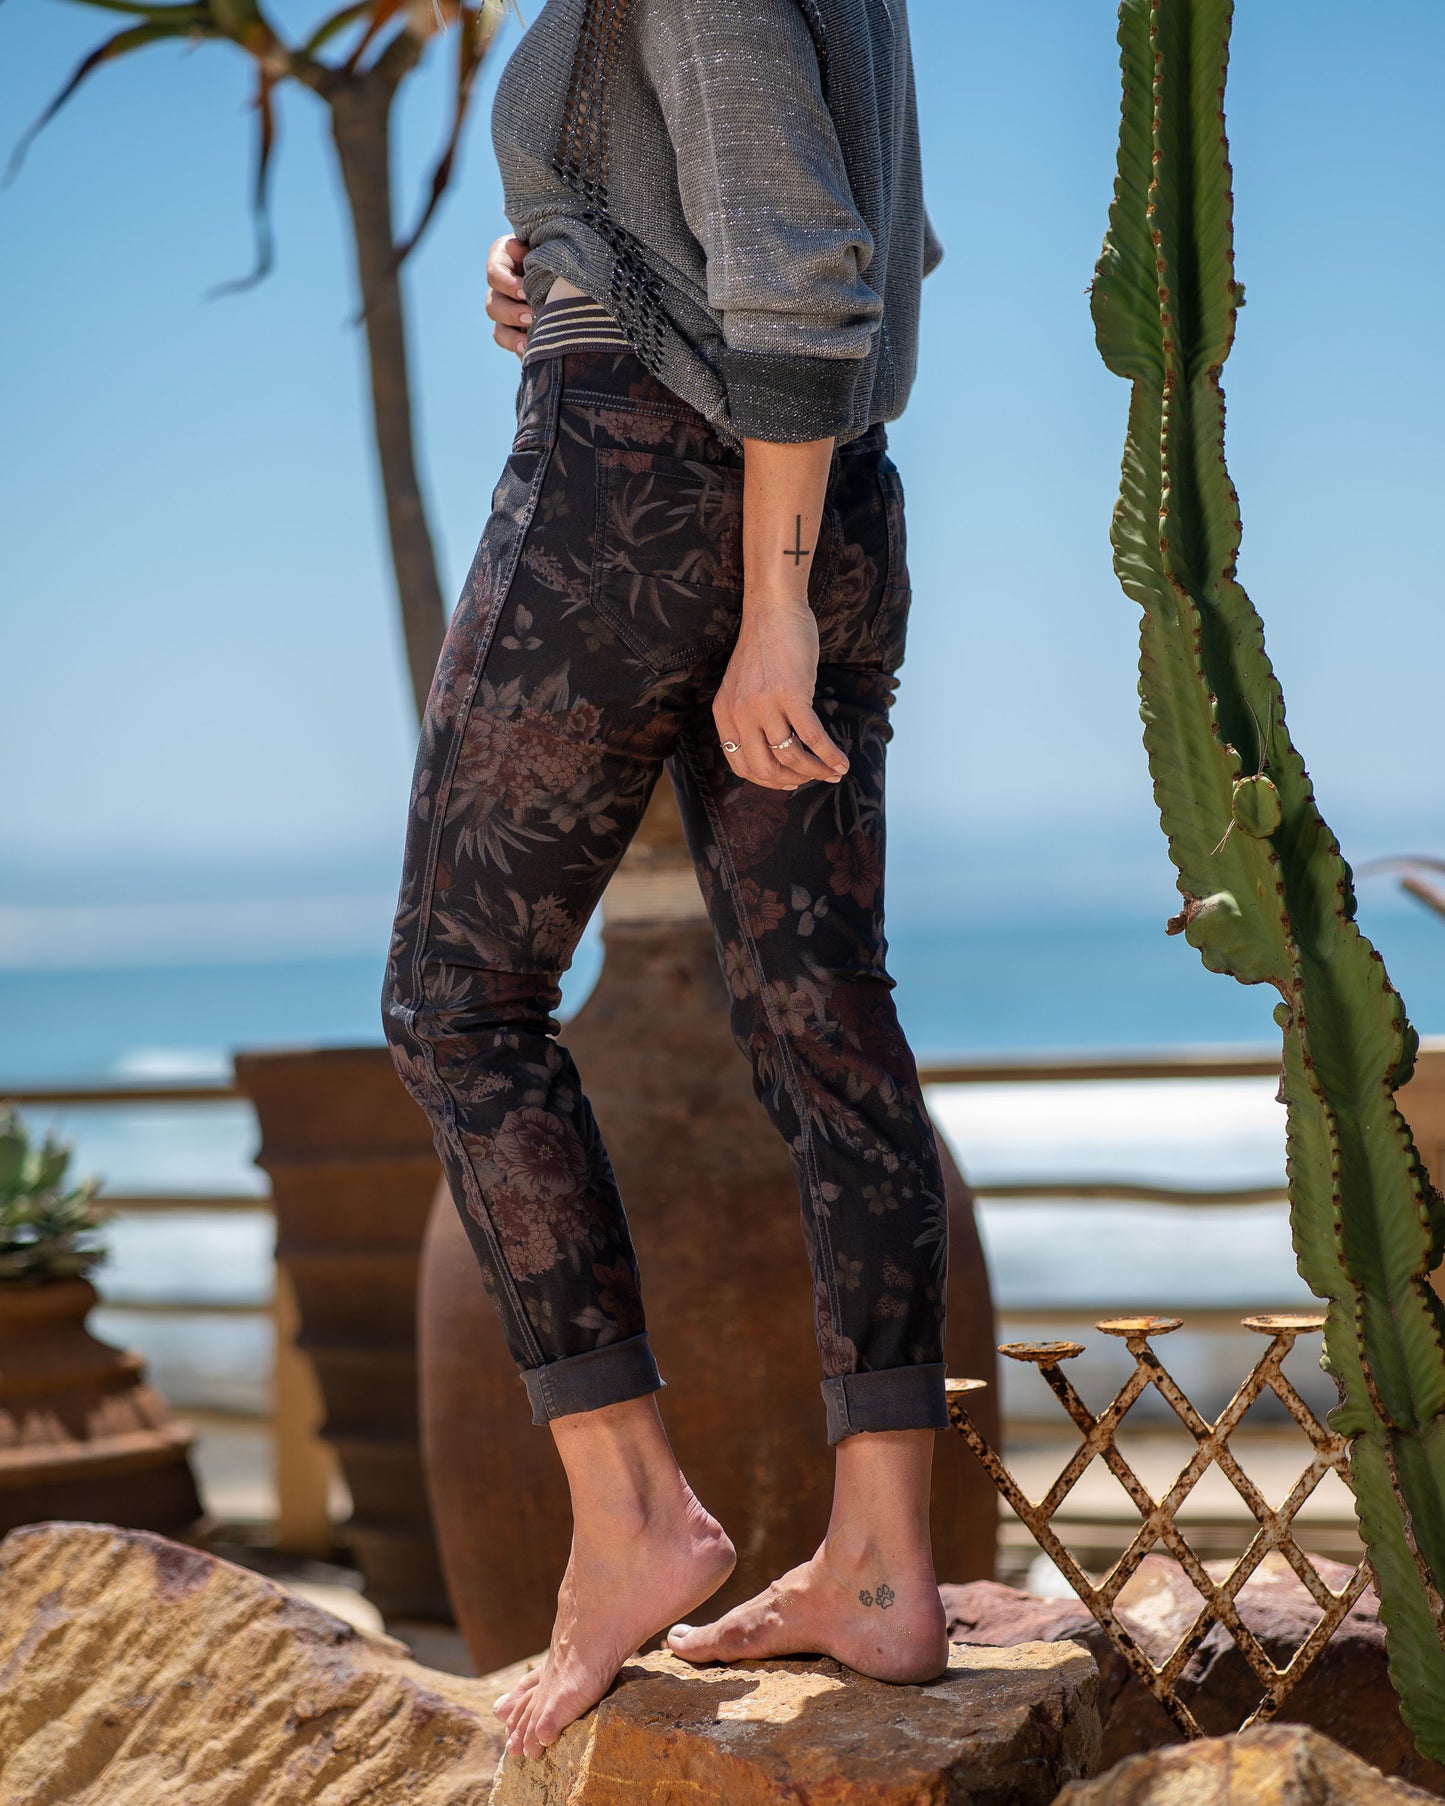 A single pair of Drawstring elasticated pants that effortlessly transitions from bold floral elegance to sleek block color, ensuring you're always ready for any fashion mood. On one side, embrace the vibrant beauty of nature with our eye-catching floral print. On the flip side, revel in the simplicity and sophistication of the block color design